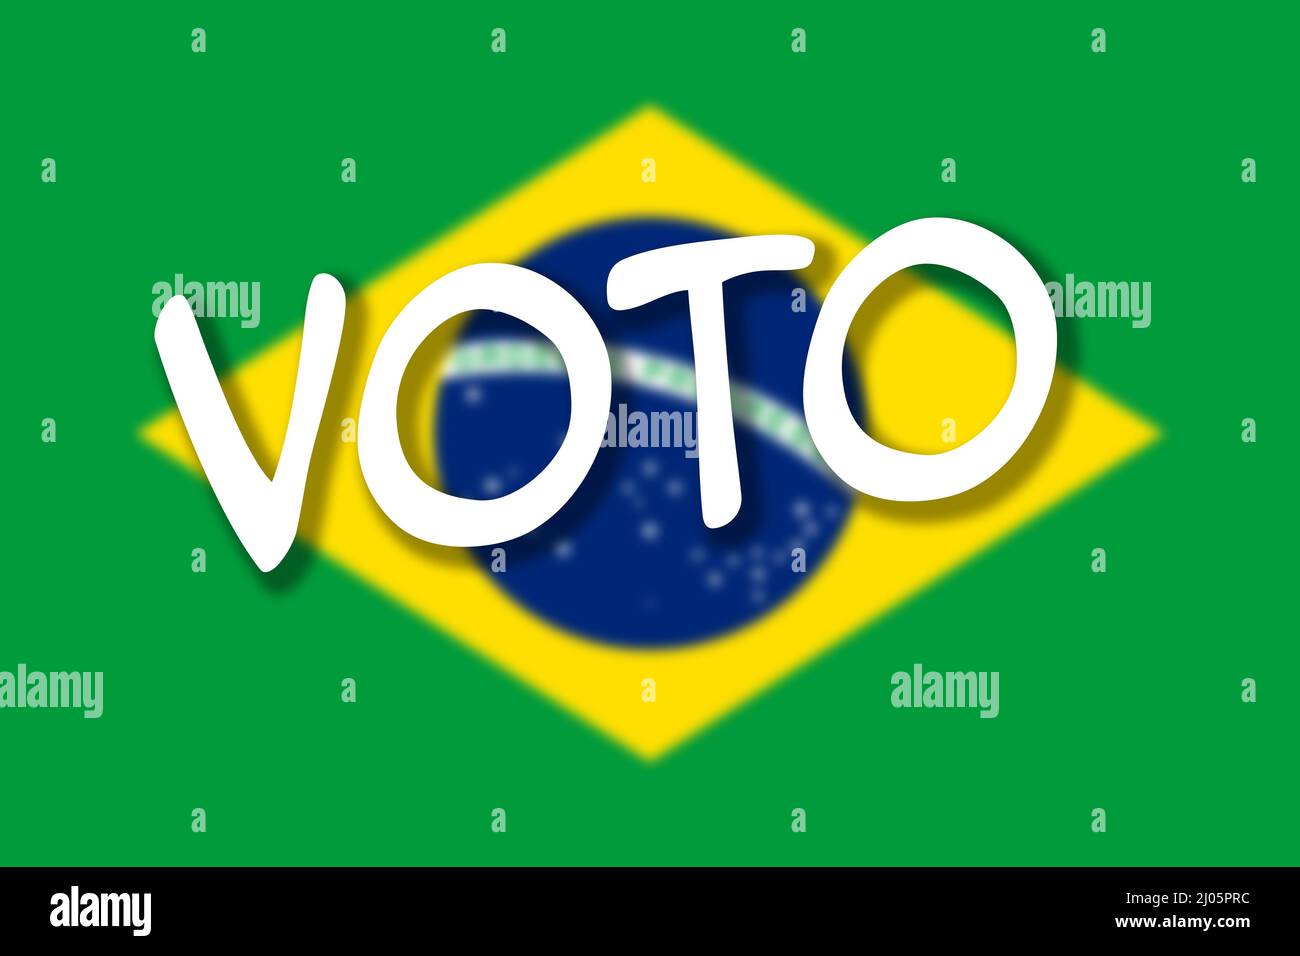 Flag of Brazil with text - VOTO - meaning VOTE in Portuguese. Stock Photo